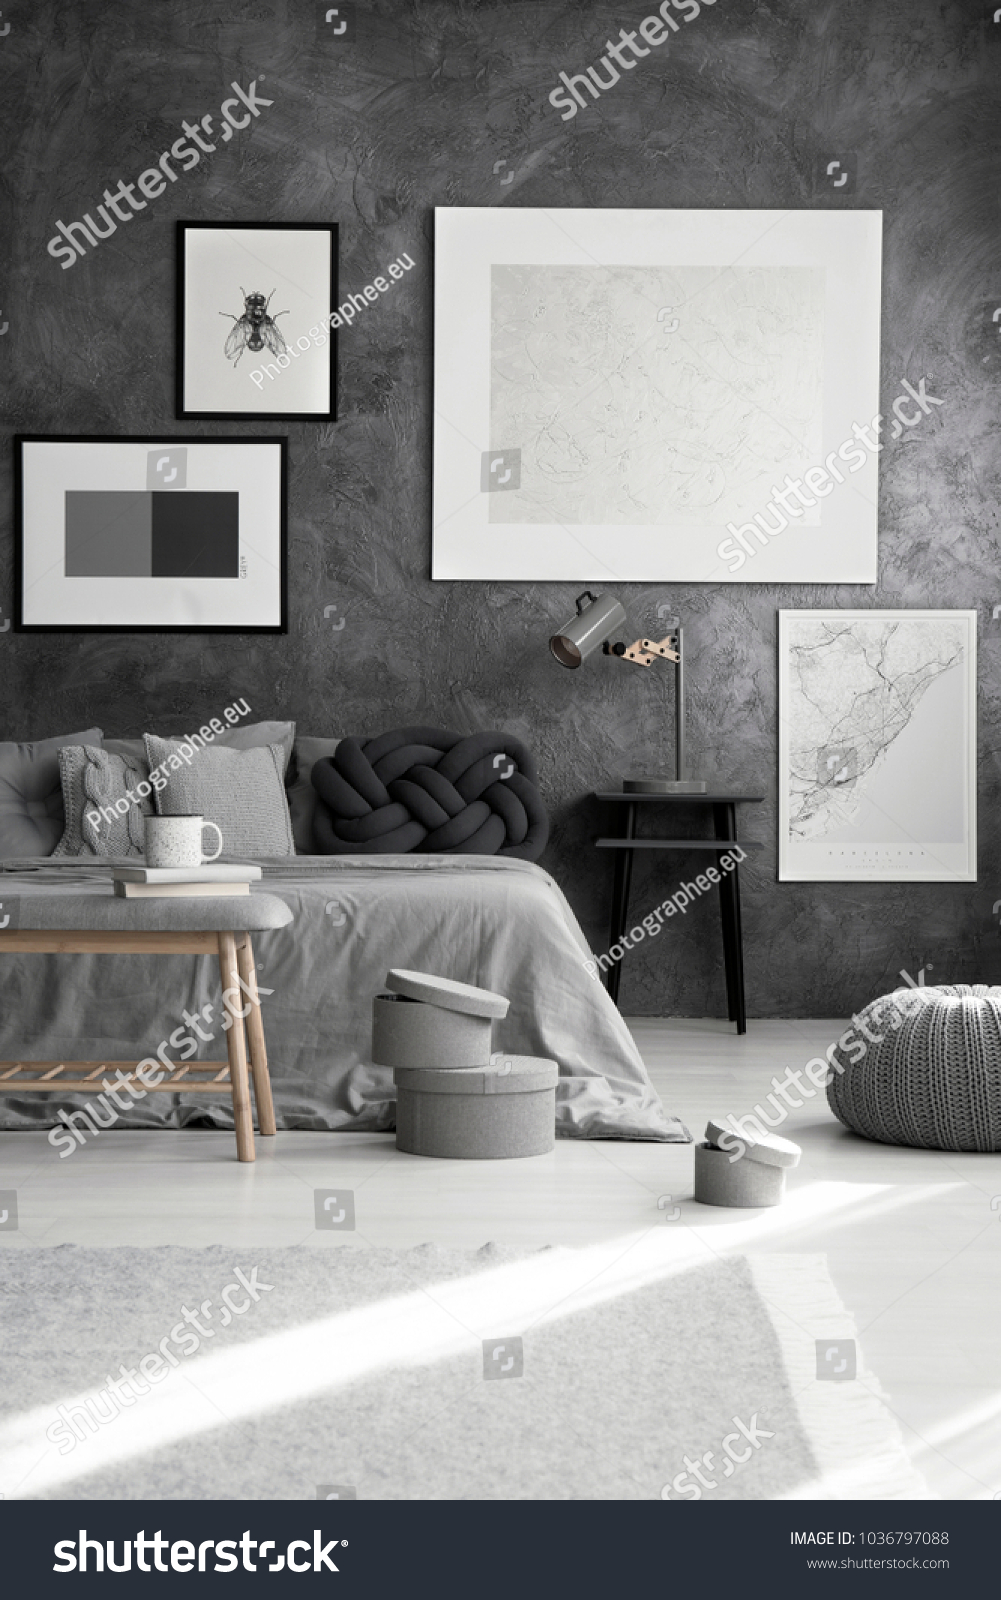 Silver painting and map on a gray wall above bed with dark knot cushion in monochromatic bedroom interior #1036797088